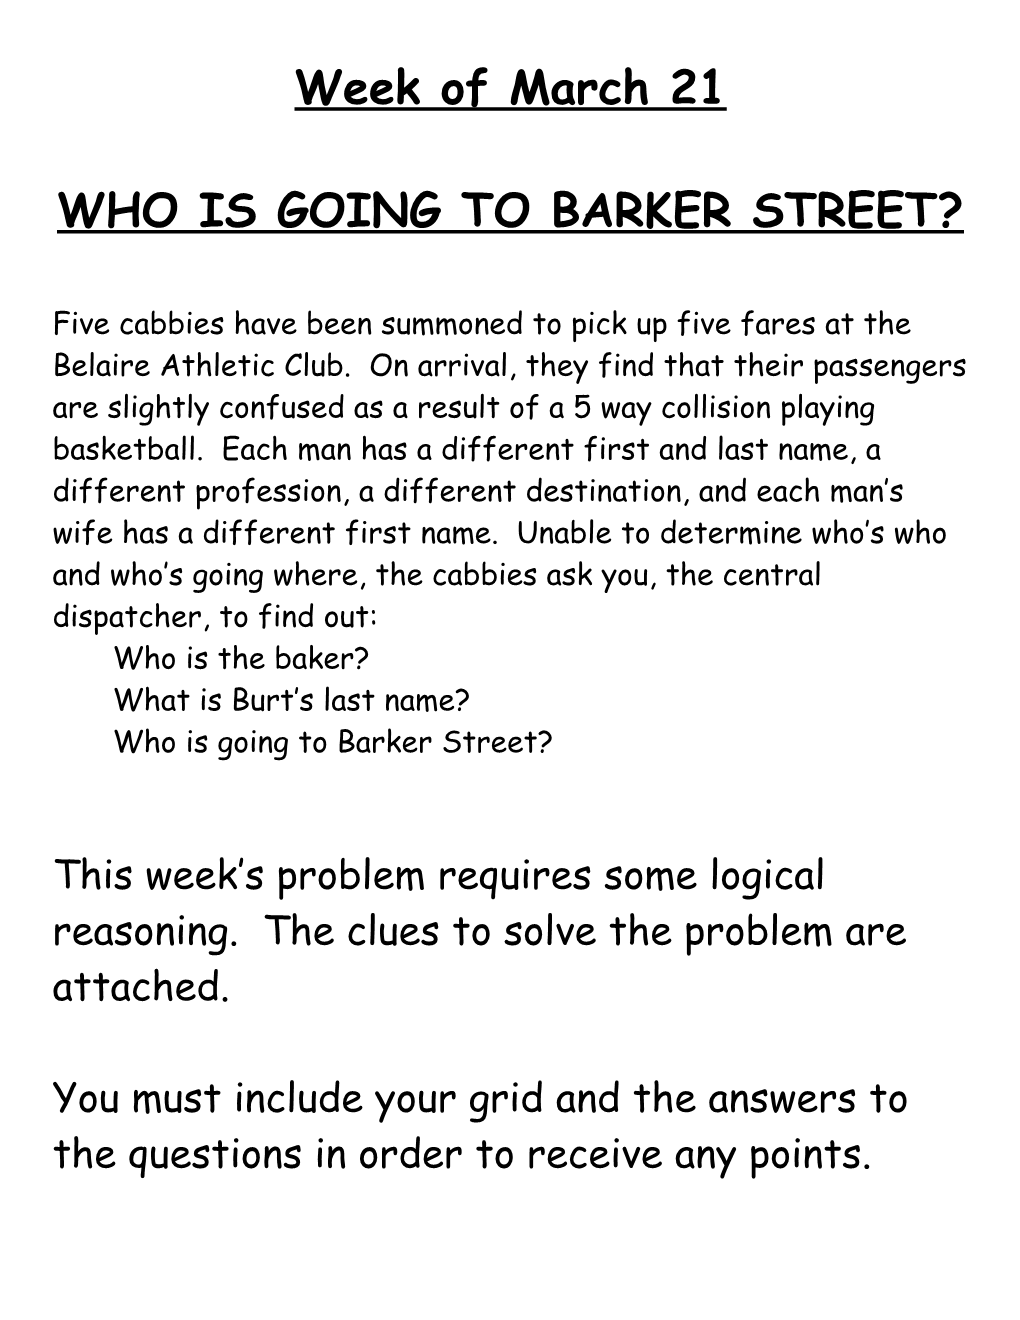 Who Is Going to Barker Street?